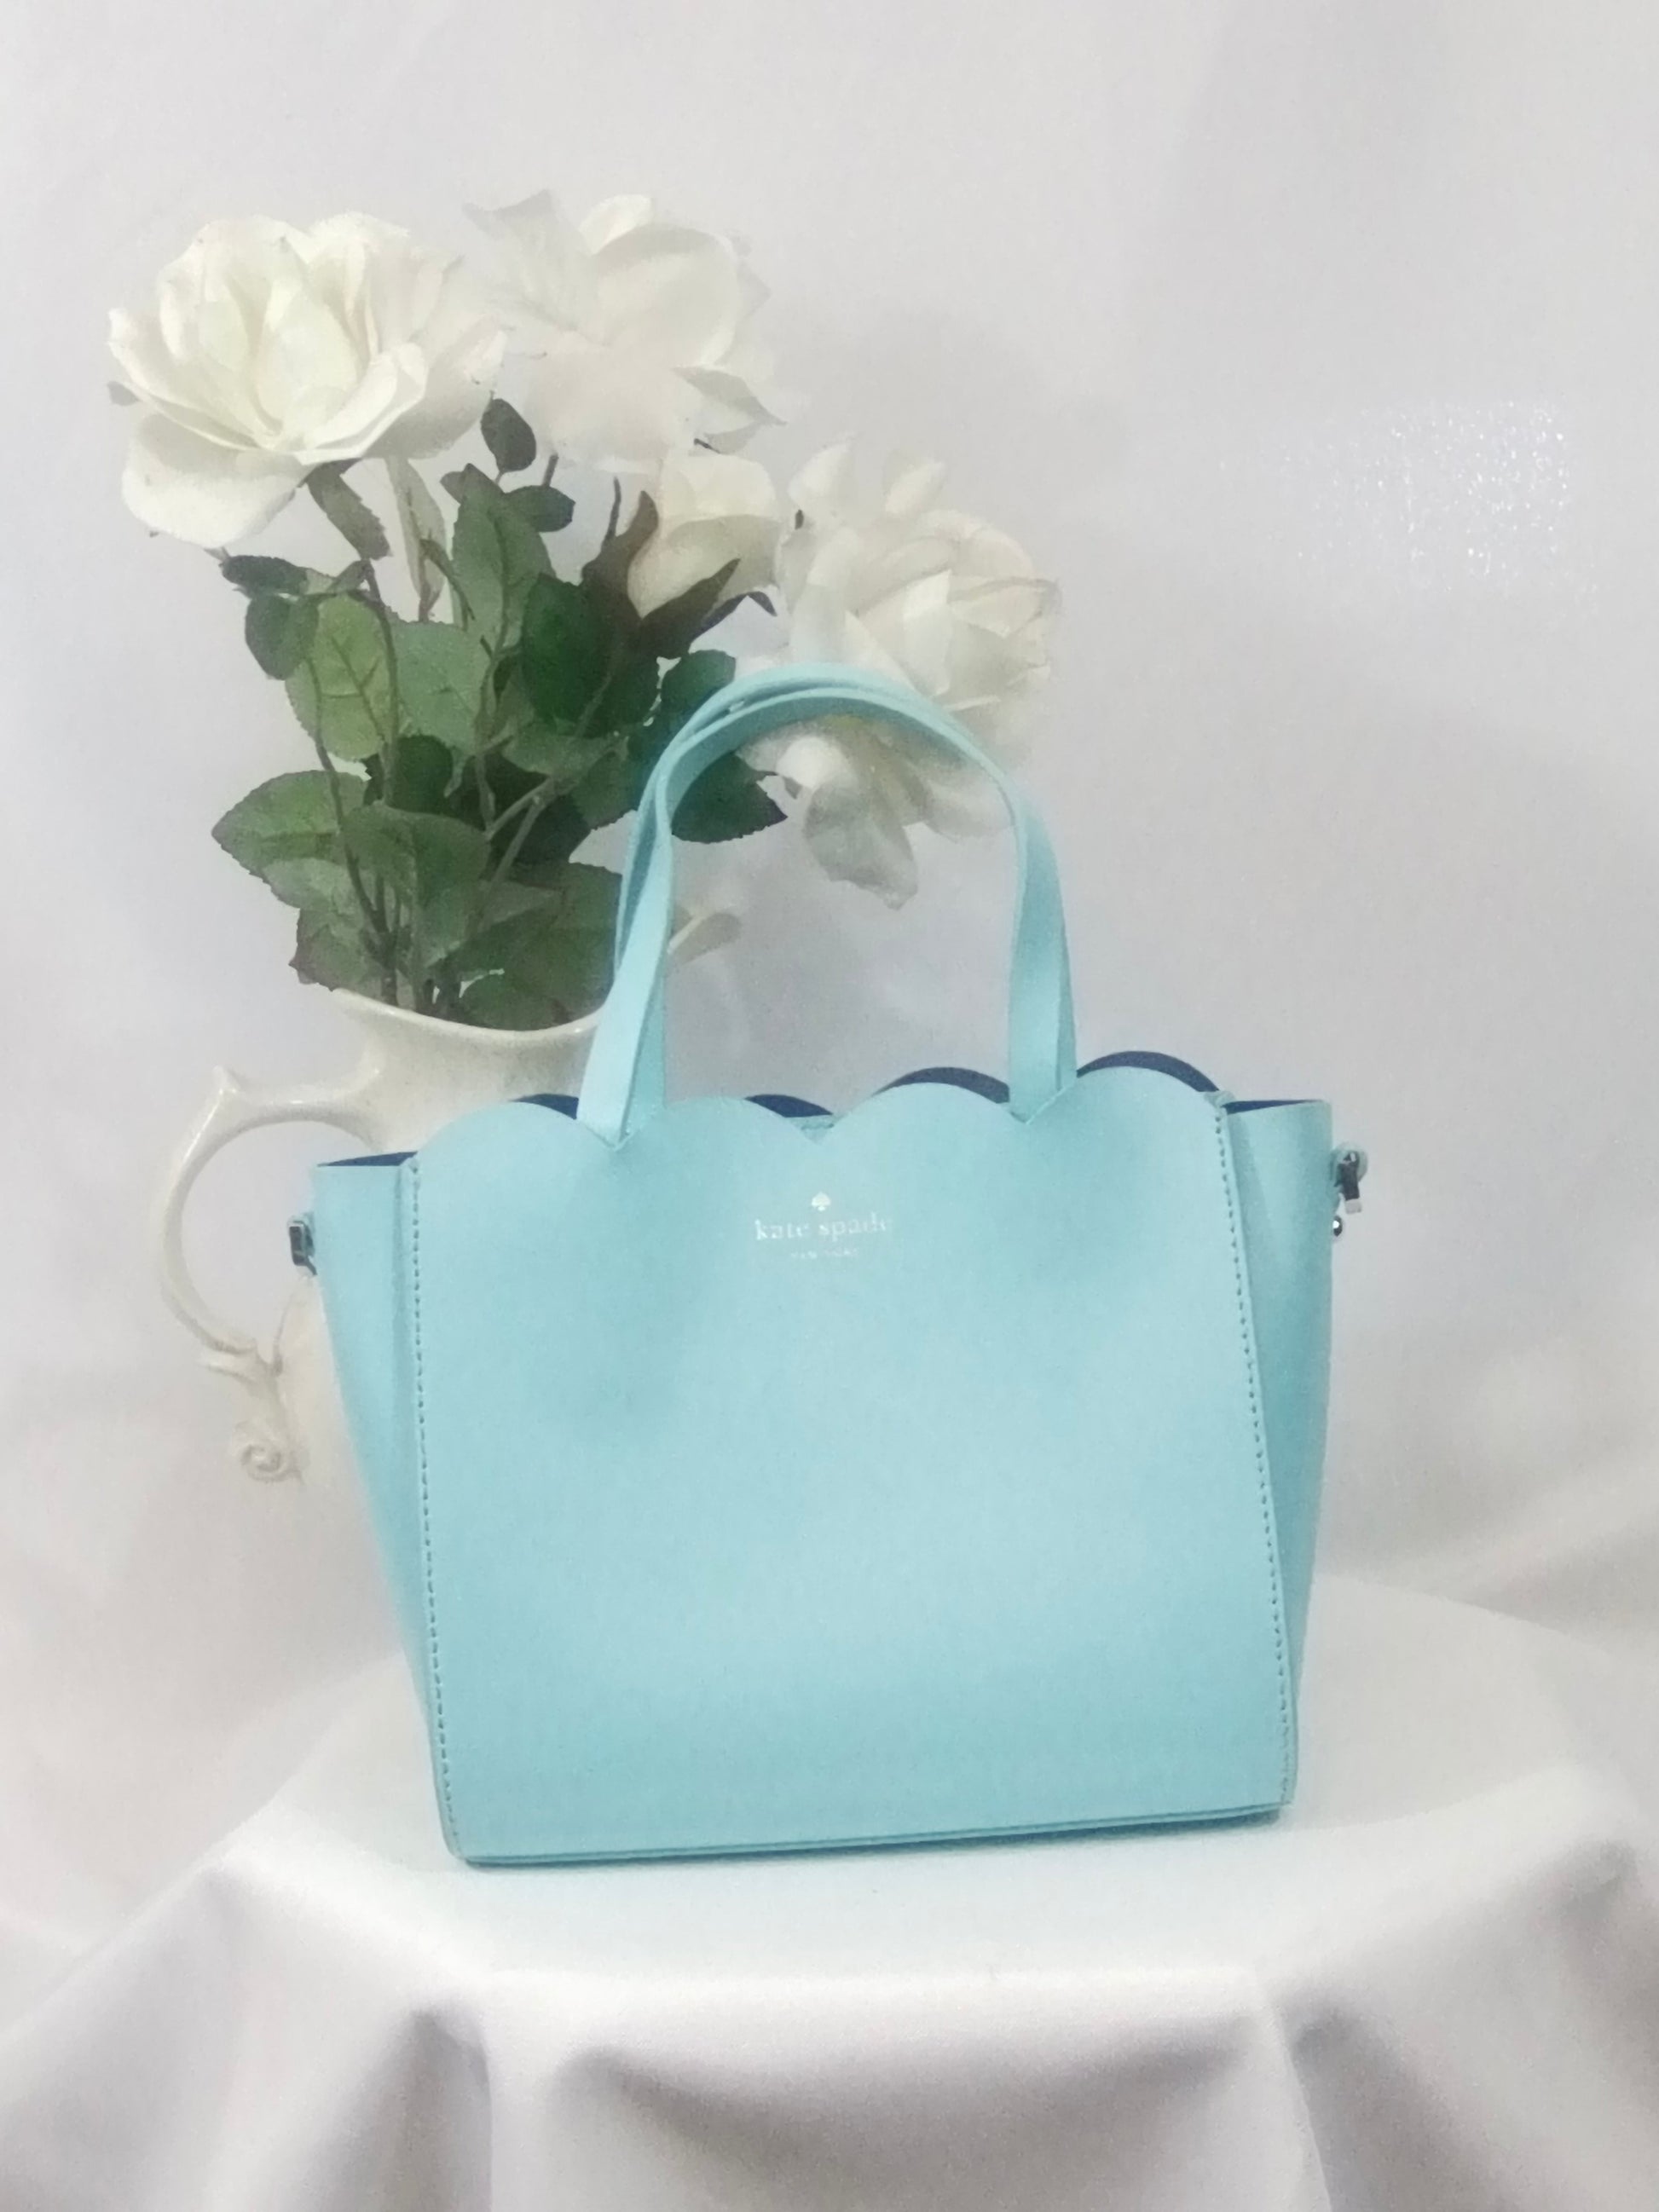 Kate Spade Turquoise Purse with Double Handles and Scalloped Edging –  PhoenixLuxe